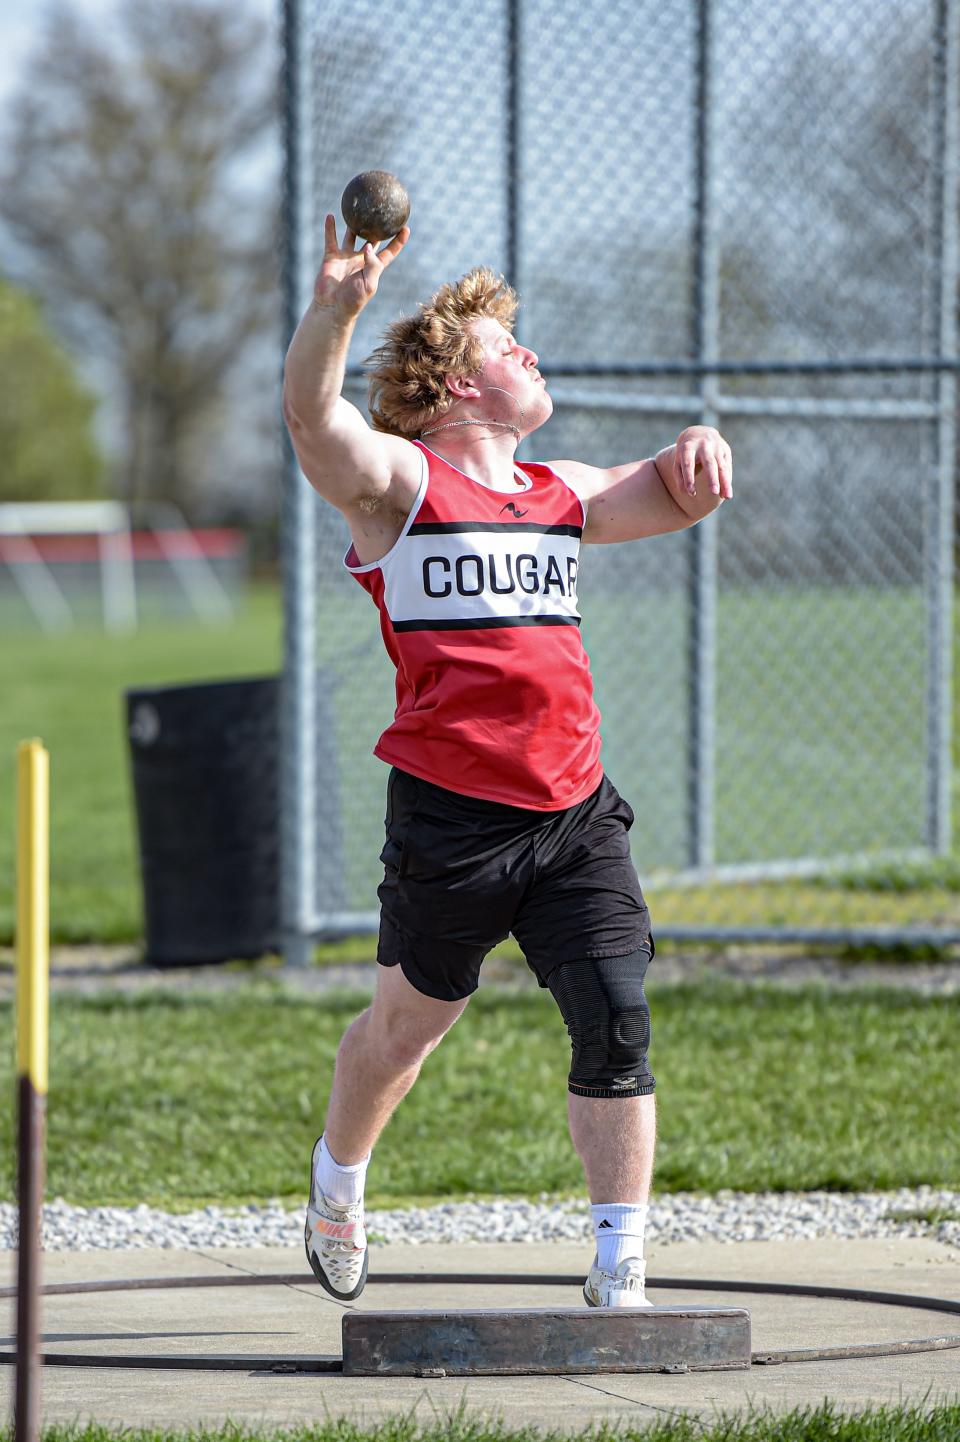 Crestview senior Wade Bolin is closing in on shot put and discus records that have stood at the school for more than 60 years.